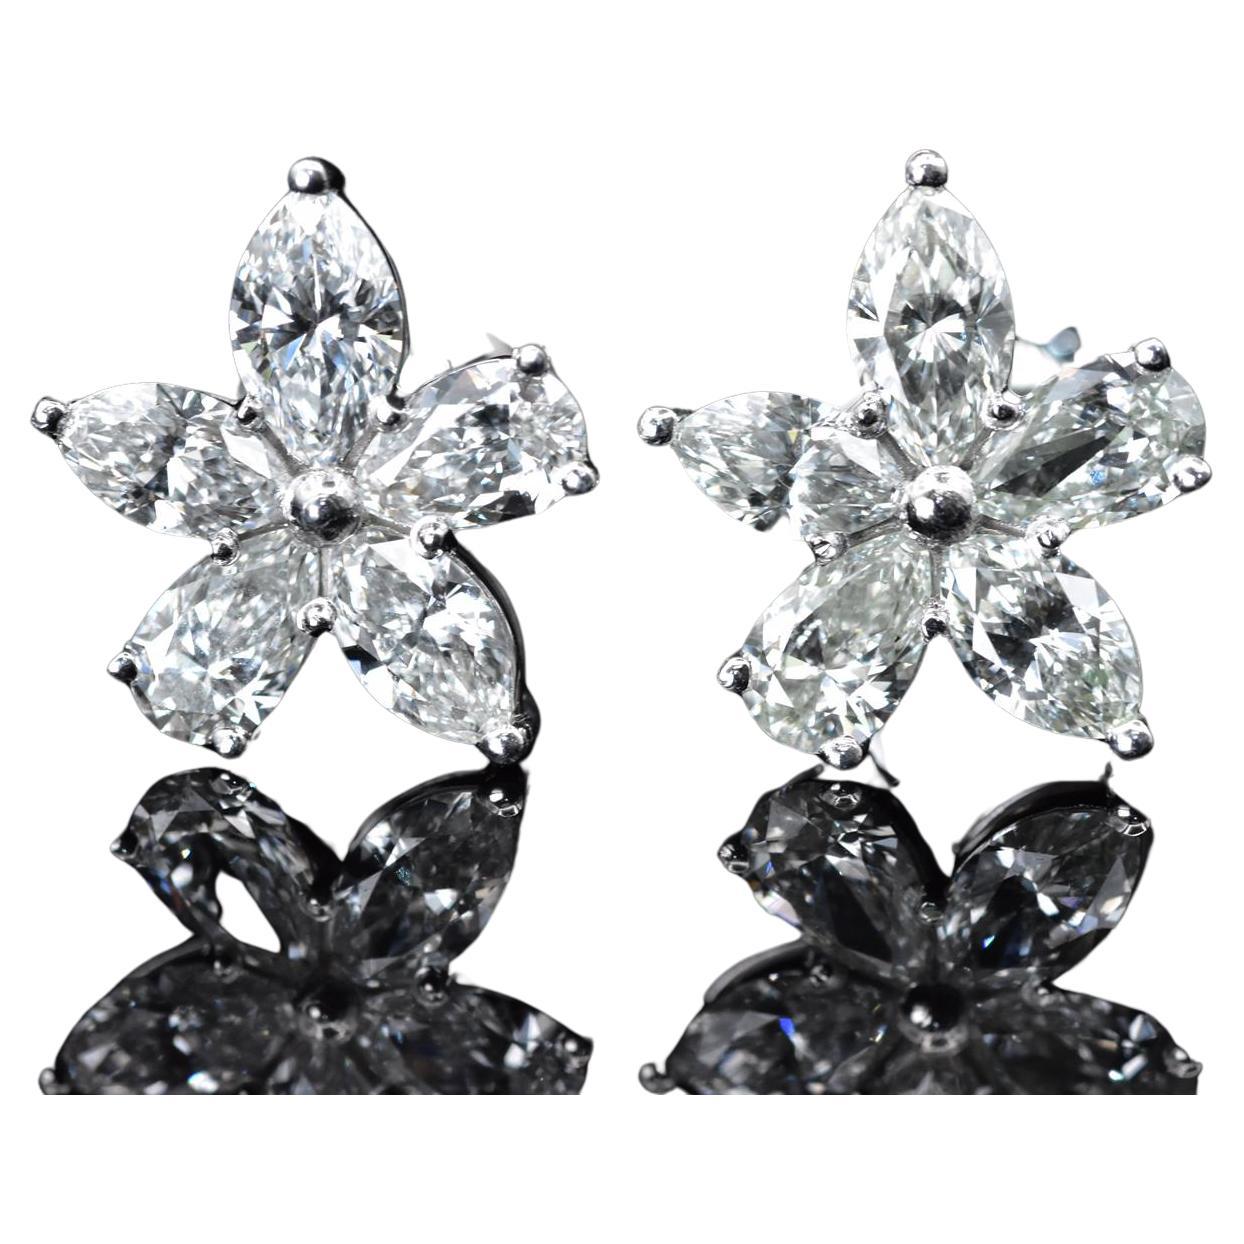 Tiffany CO Victoria Mixed Cluster Earrings 
Size : Large 
Marquise Diamonds , carat weight approximately 0.93
Pear shape diamonds, carat weight approximately 0.84 
Platinum with Diamonds 
Stud earrings 
Come within the original packaging 
Retail